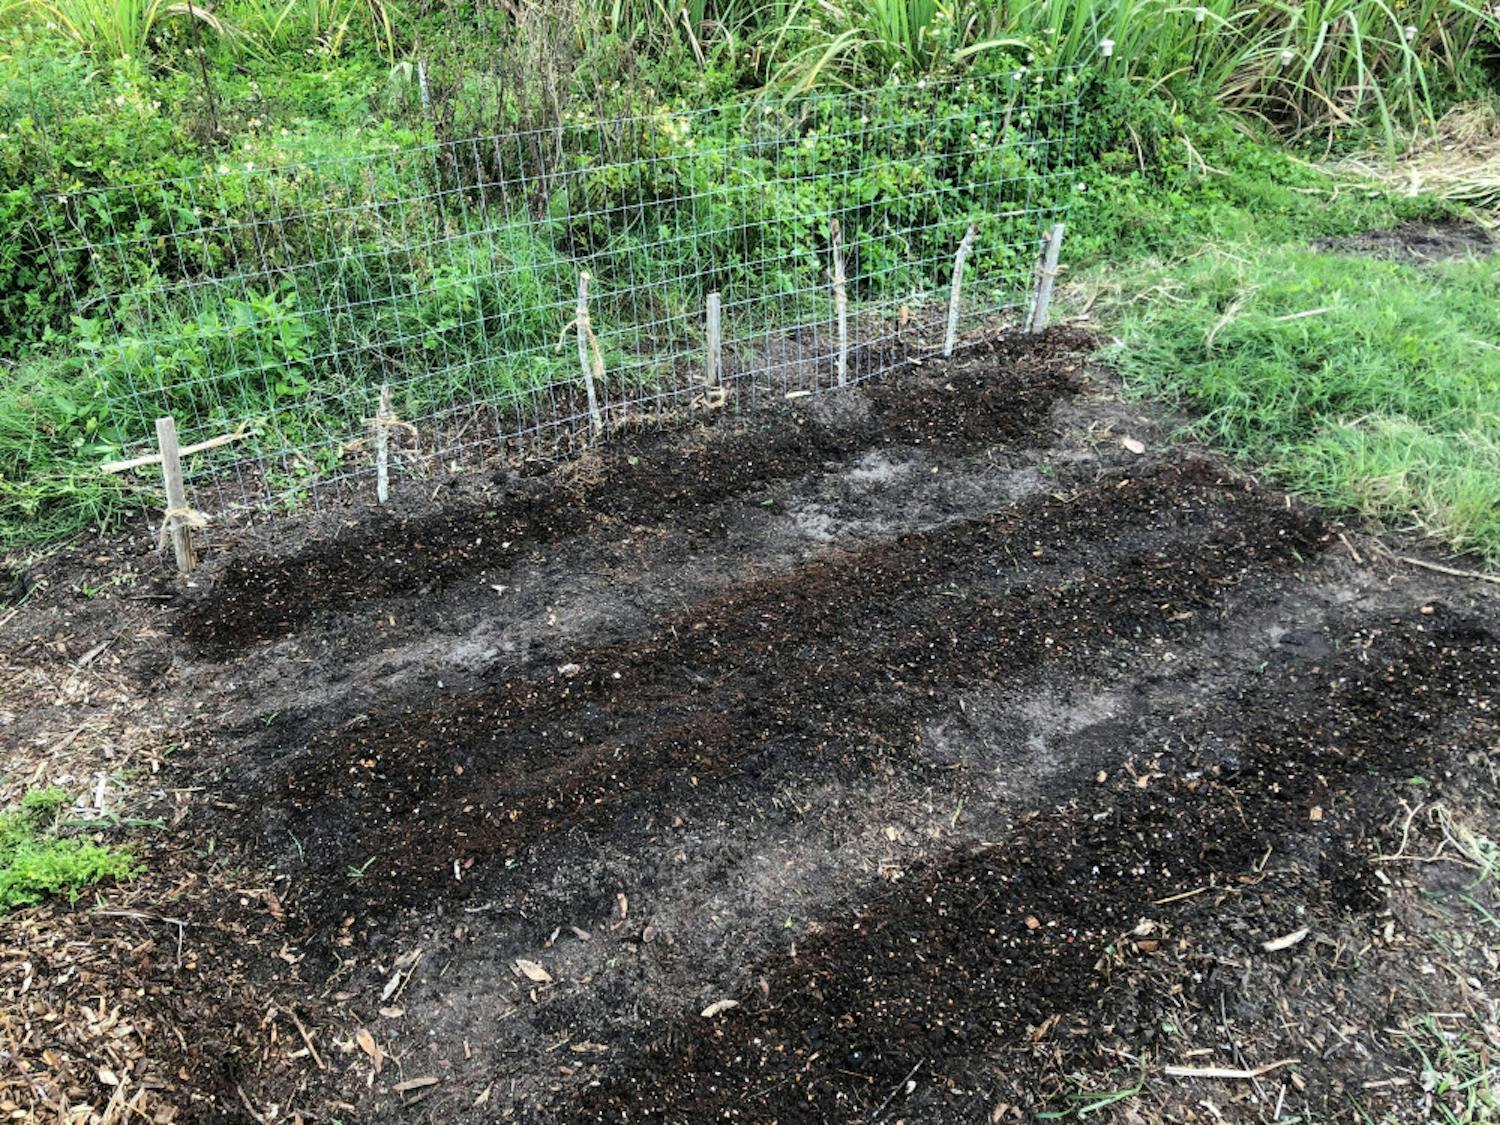 Composting is a sustainable process that reduces greenhouse emissions. Daisy Andrews, a 22-year-old UF natural resource conservation senior, adds compost (the darker lines) on top of the seeds she planted.  